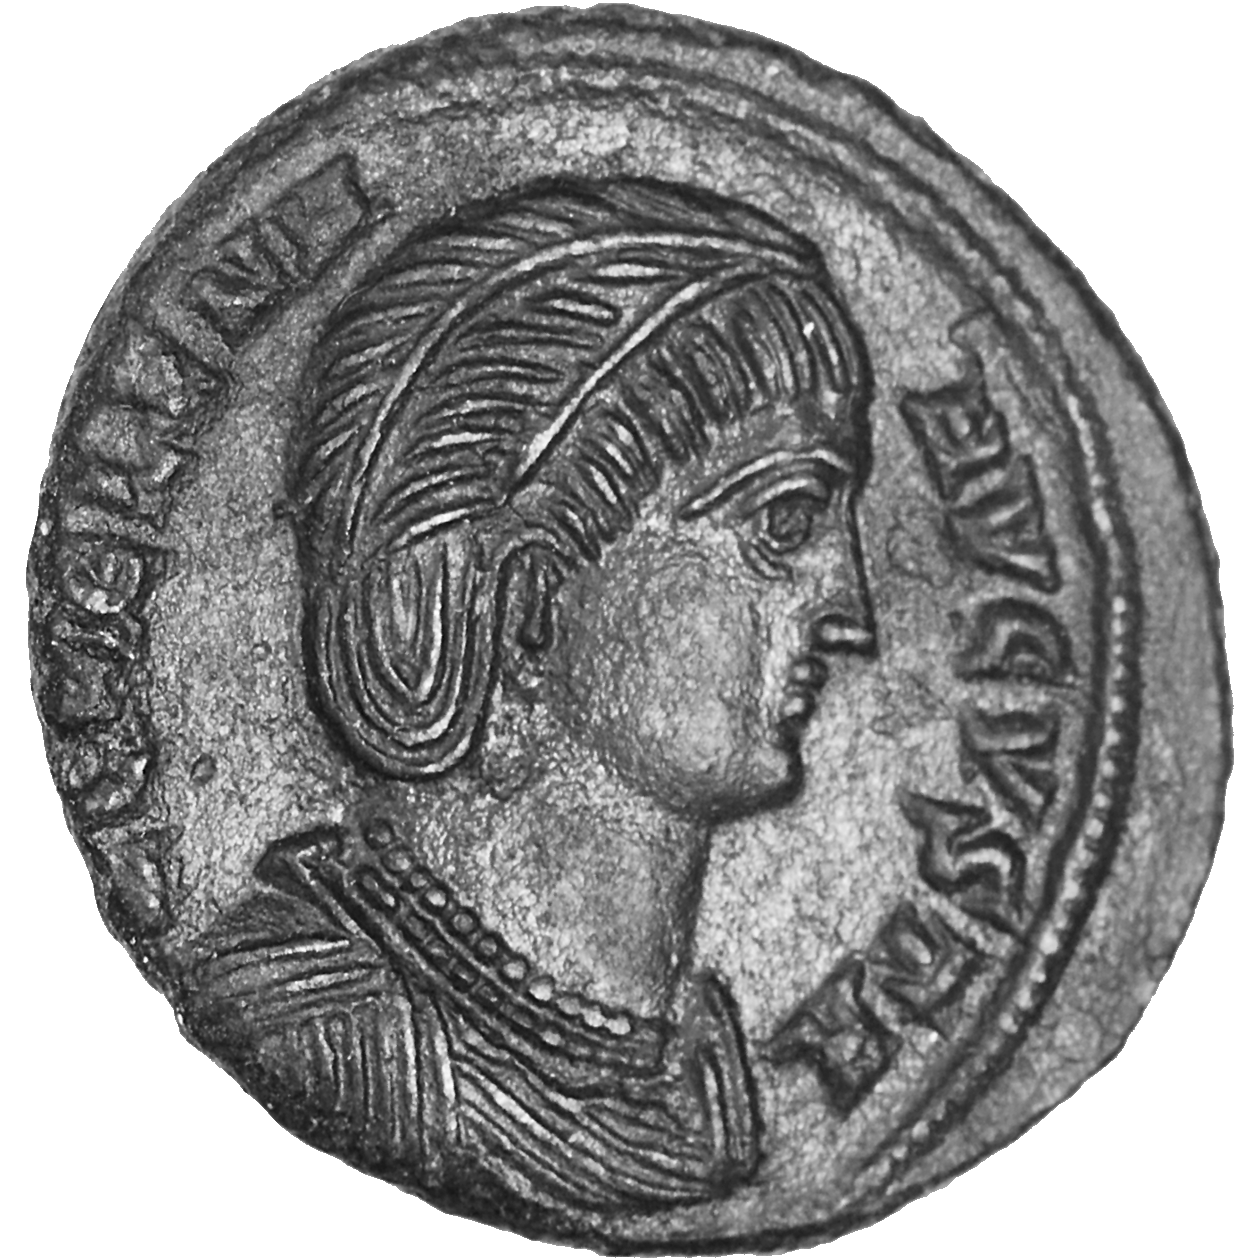 Roman Empire, Constantine I the Great for his Mother Helena, Follis (obverse)